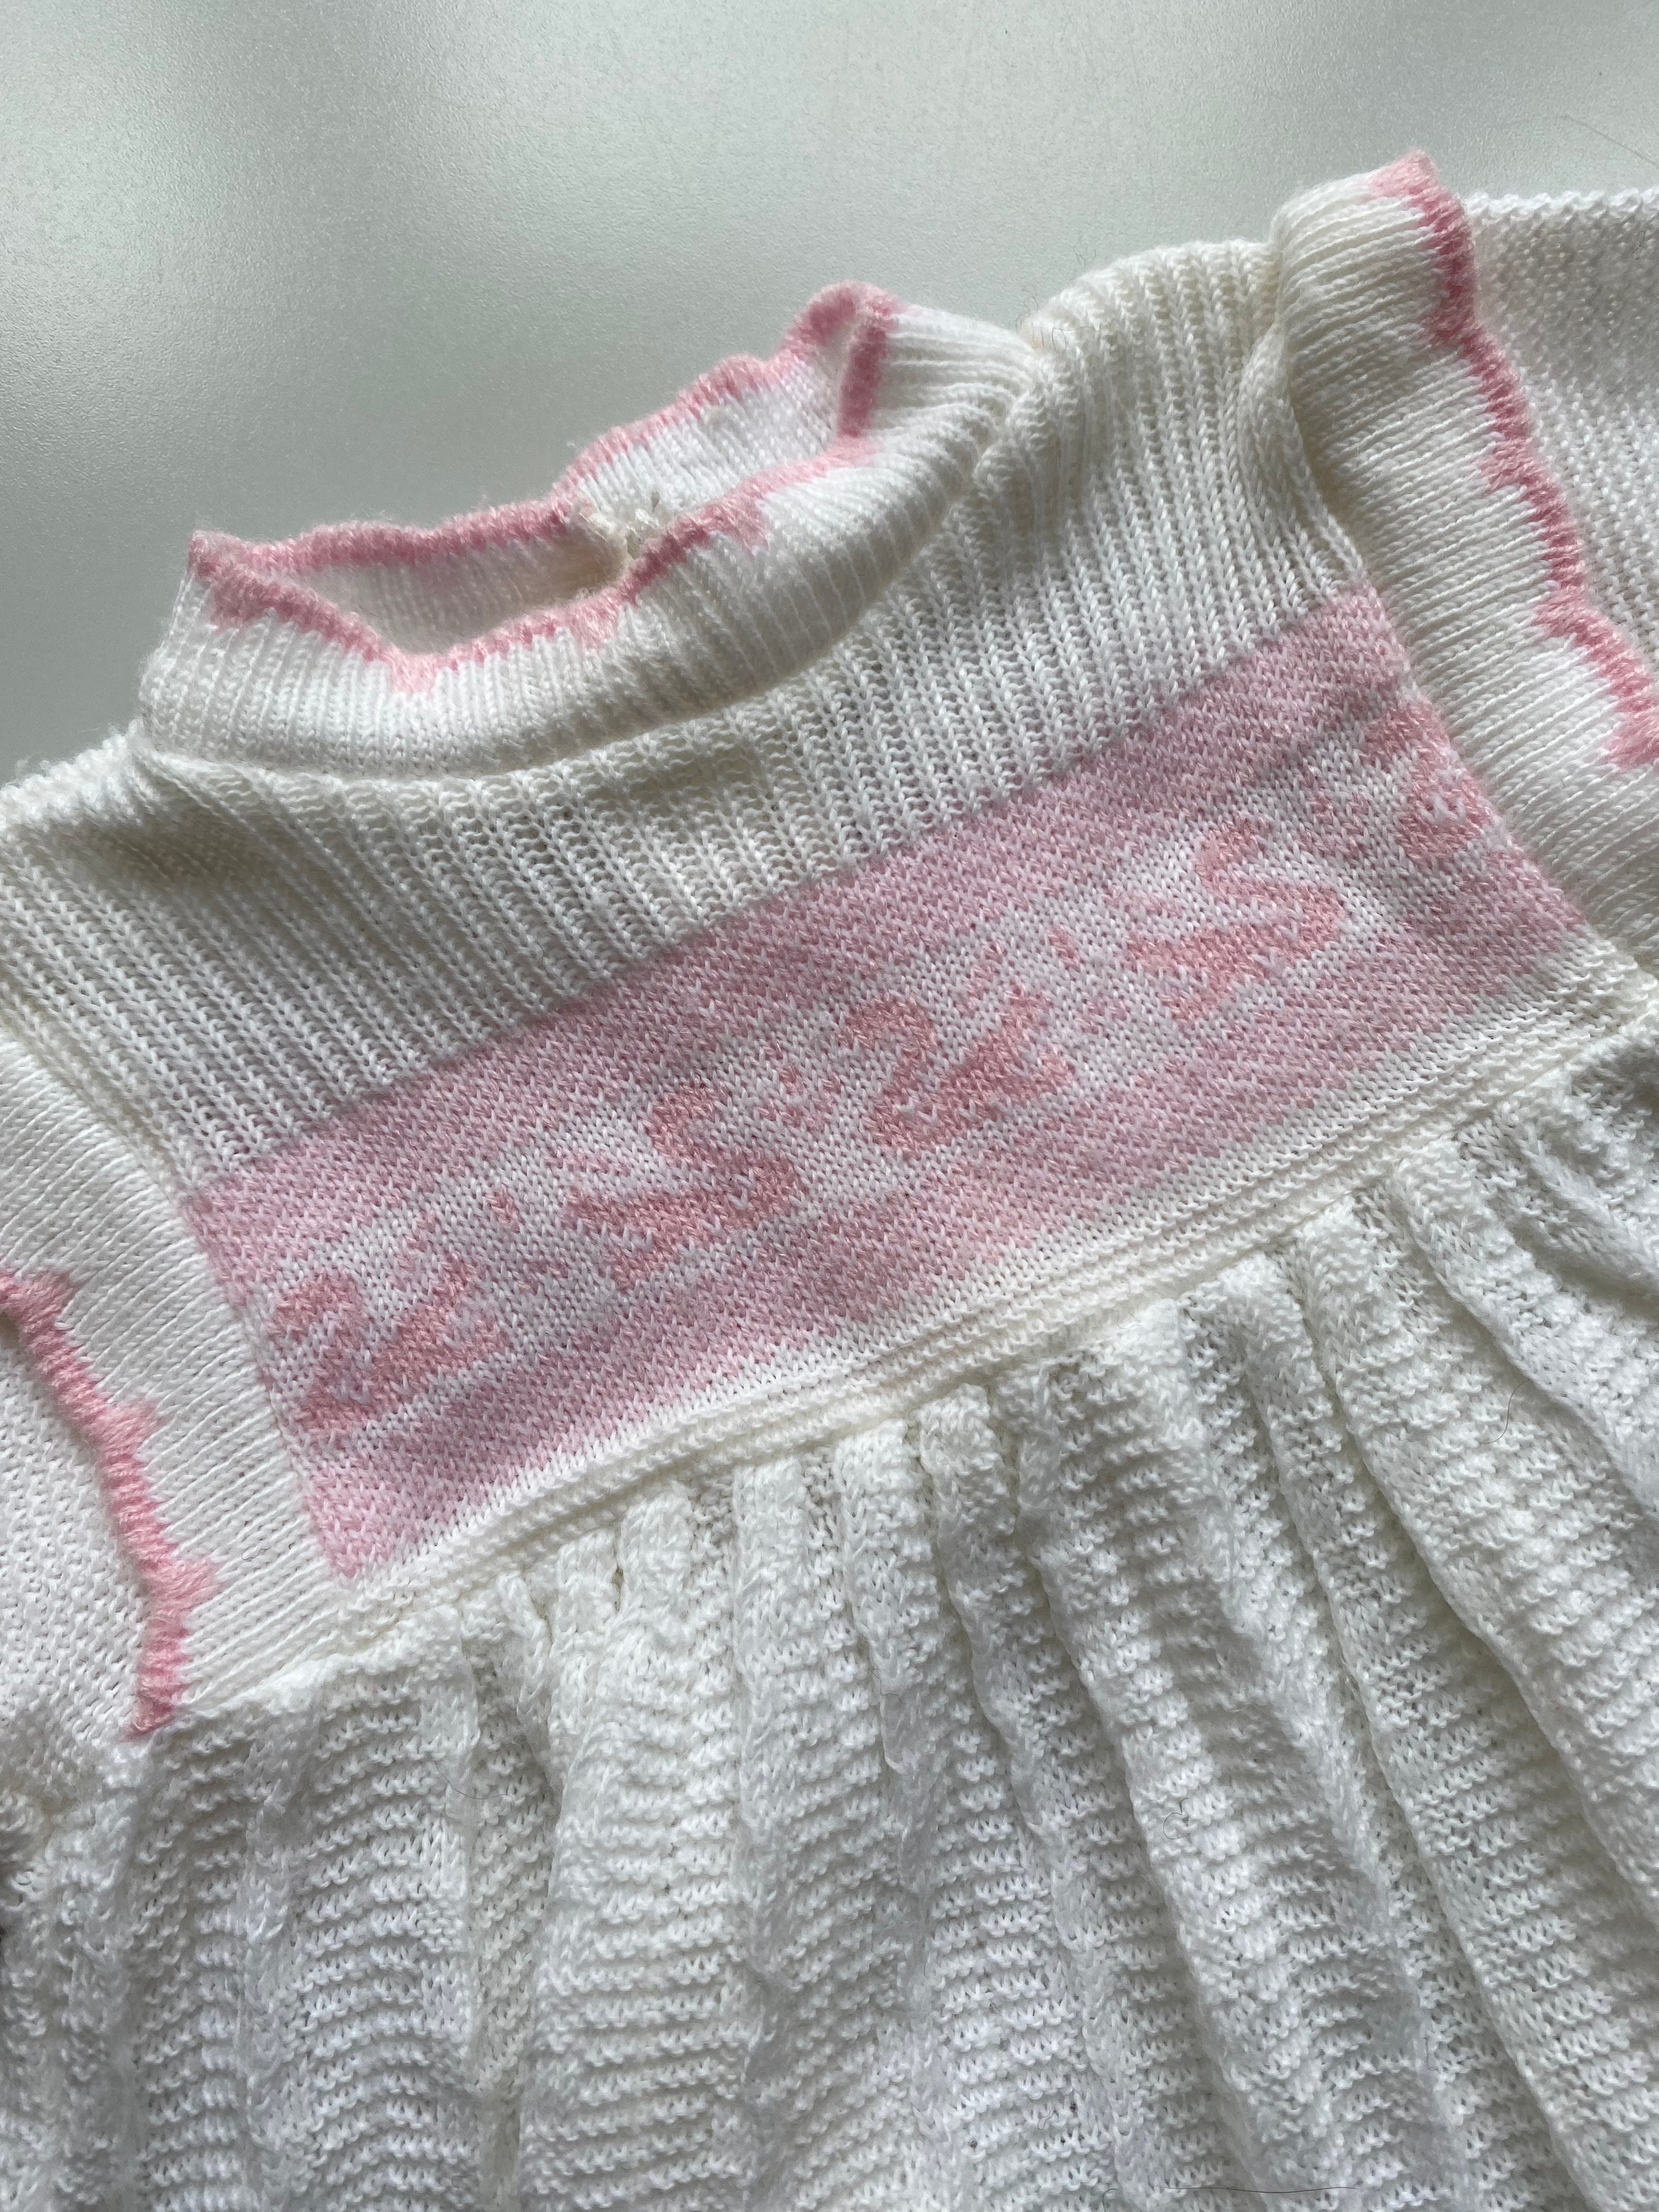 Vintage Knitted Swan Dress 3-6 Months